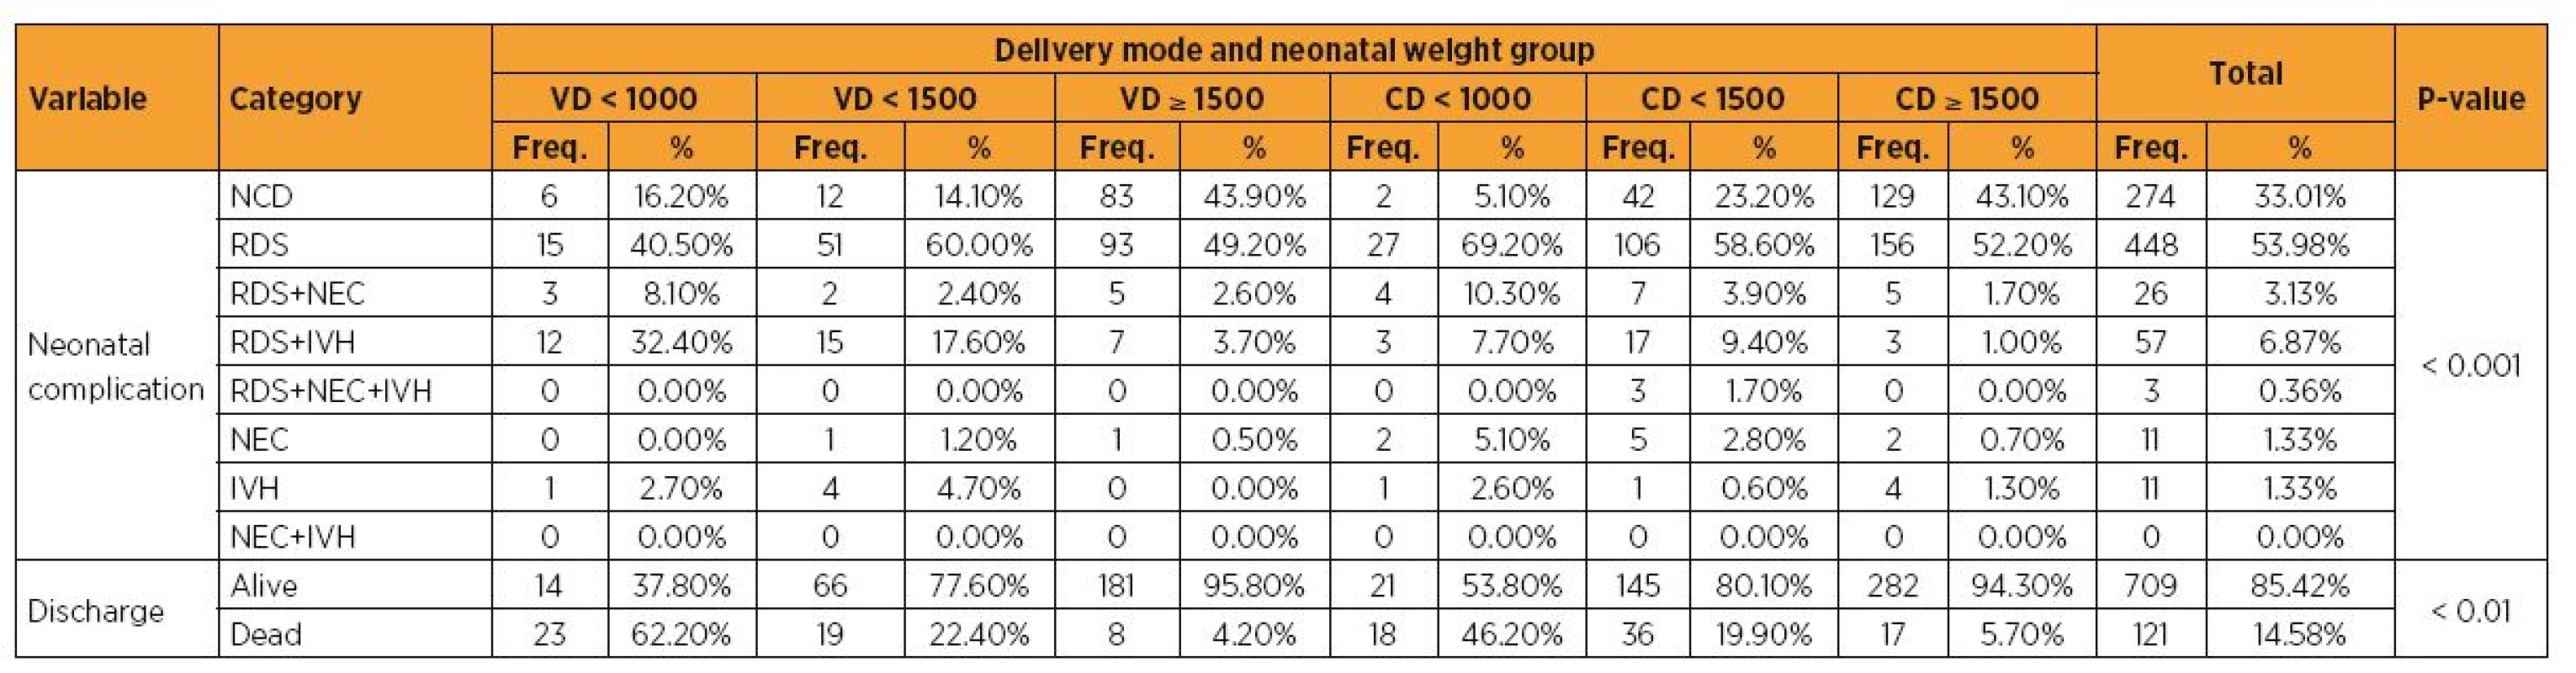 Incidence of neonatal complications, according to the delivery mode and neonatal weight group